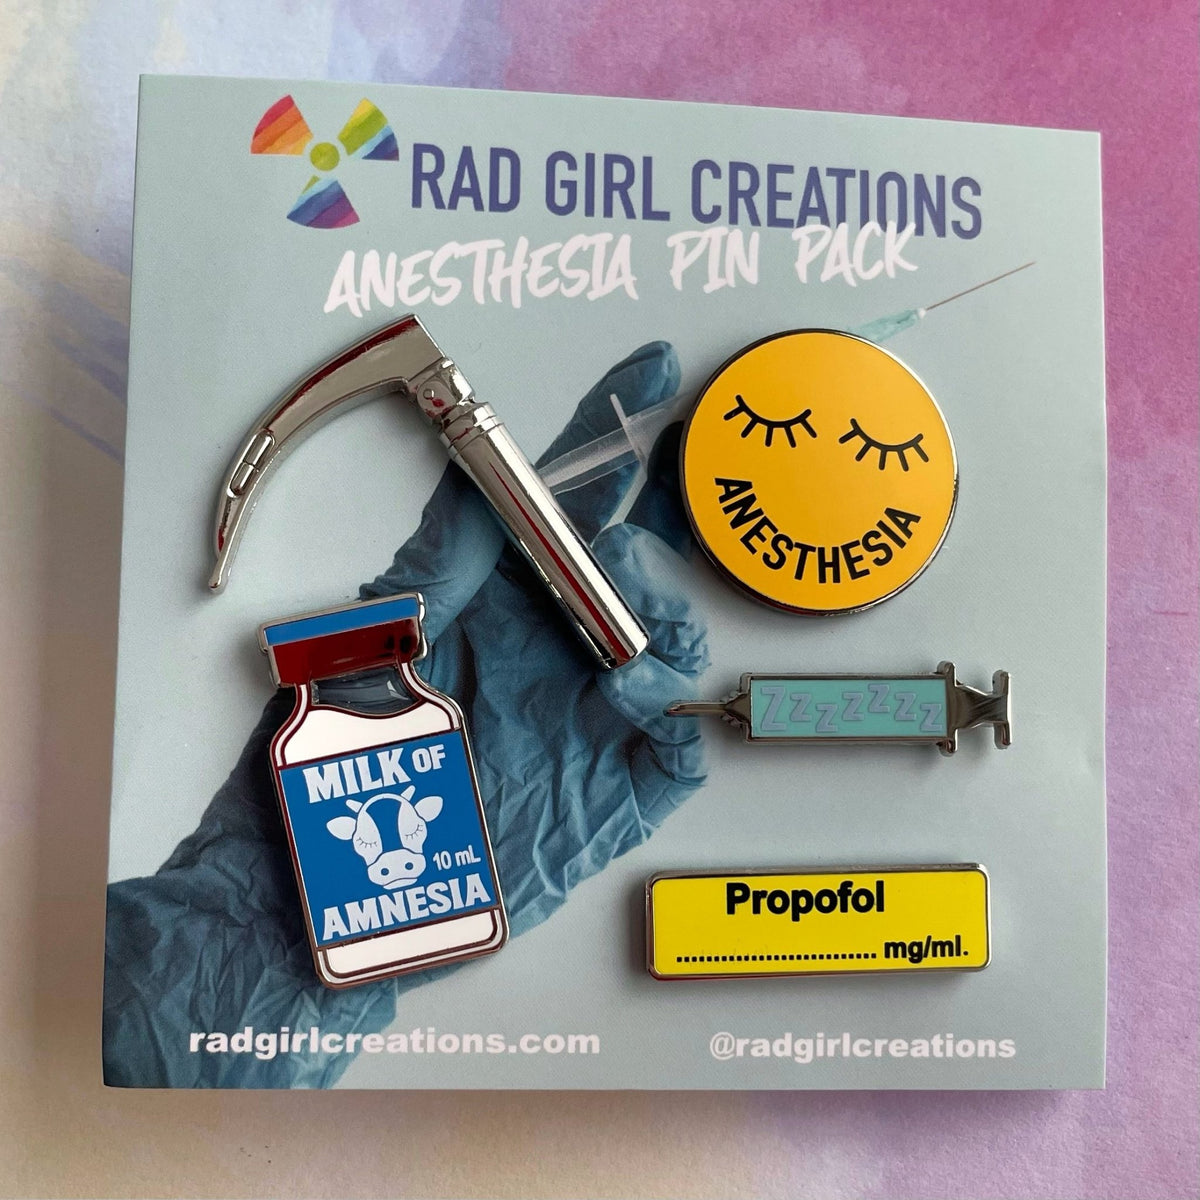 Anesthesia Pin Pack - Rad Girl Creations